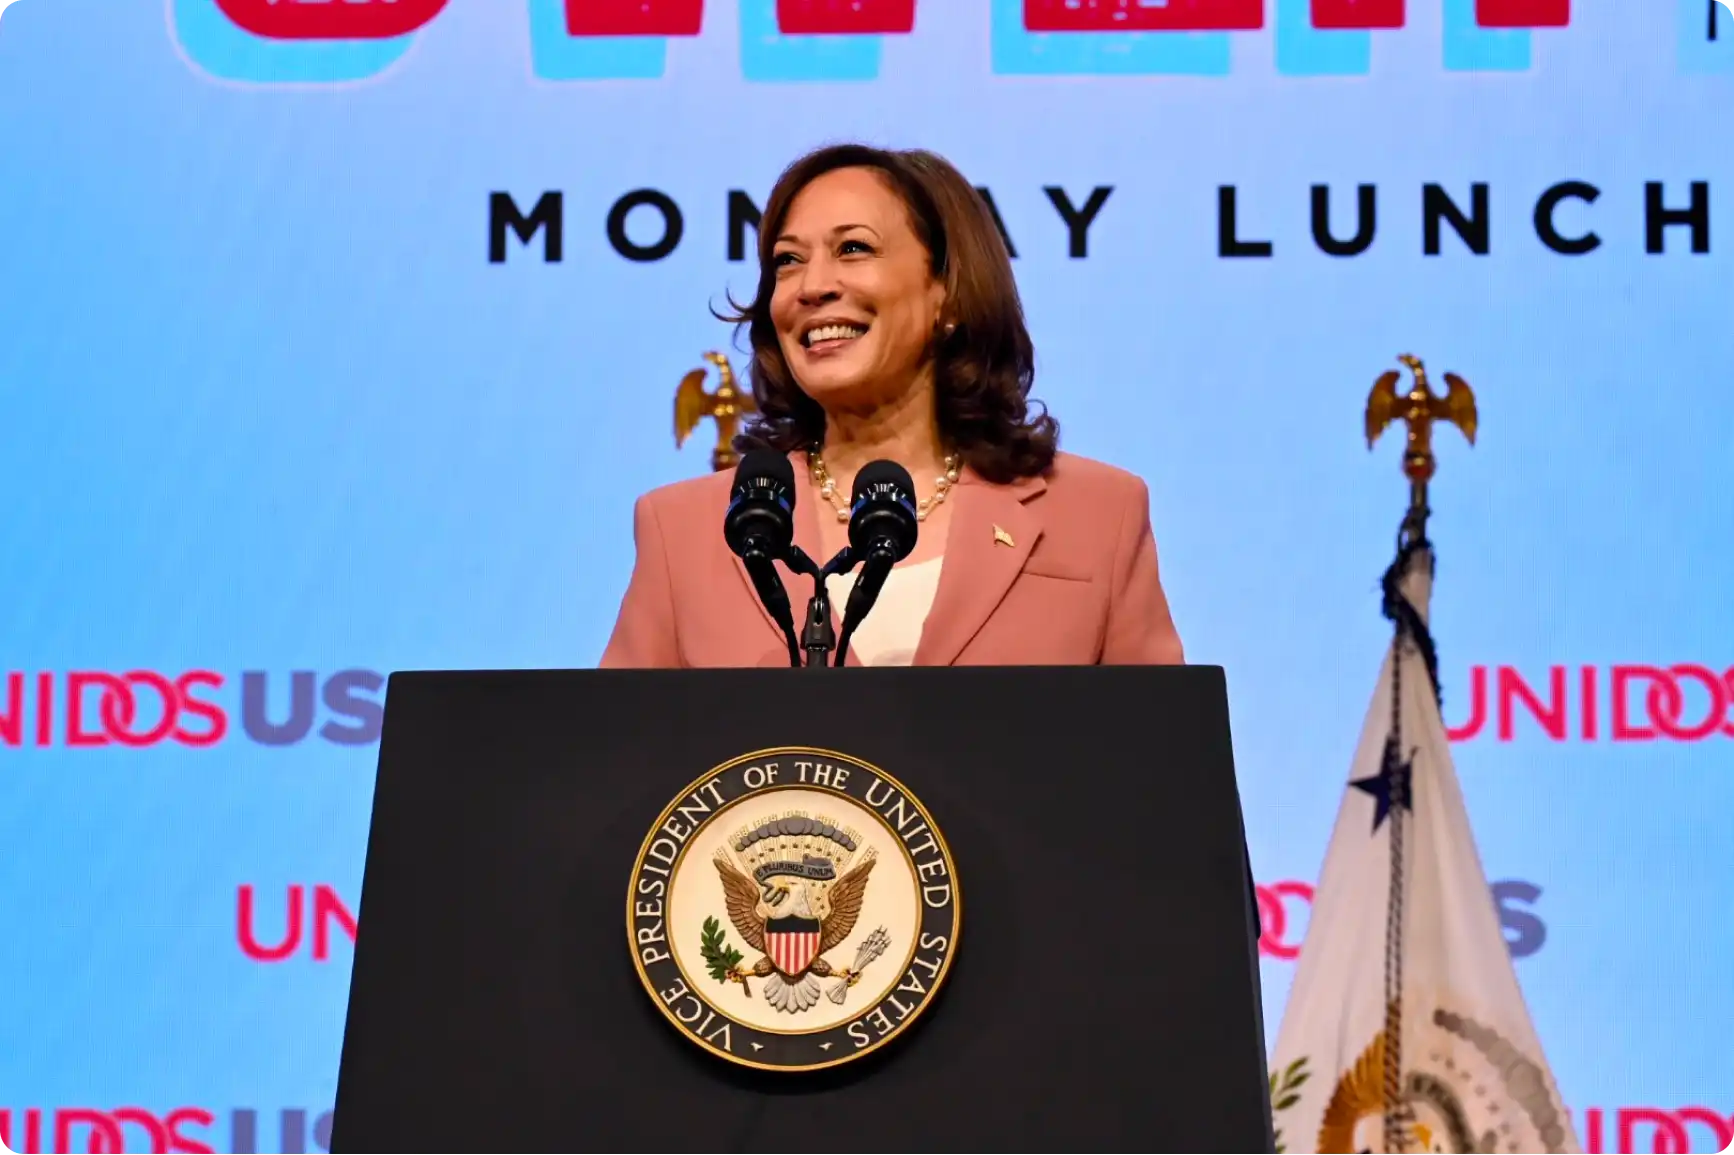 Vice President Kamala Harris at podium with Vice Presidental Seal speaking at the 2023 UnidosUS Annual Conference in Chicago, IL.